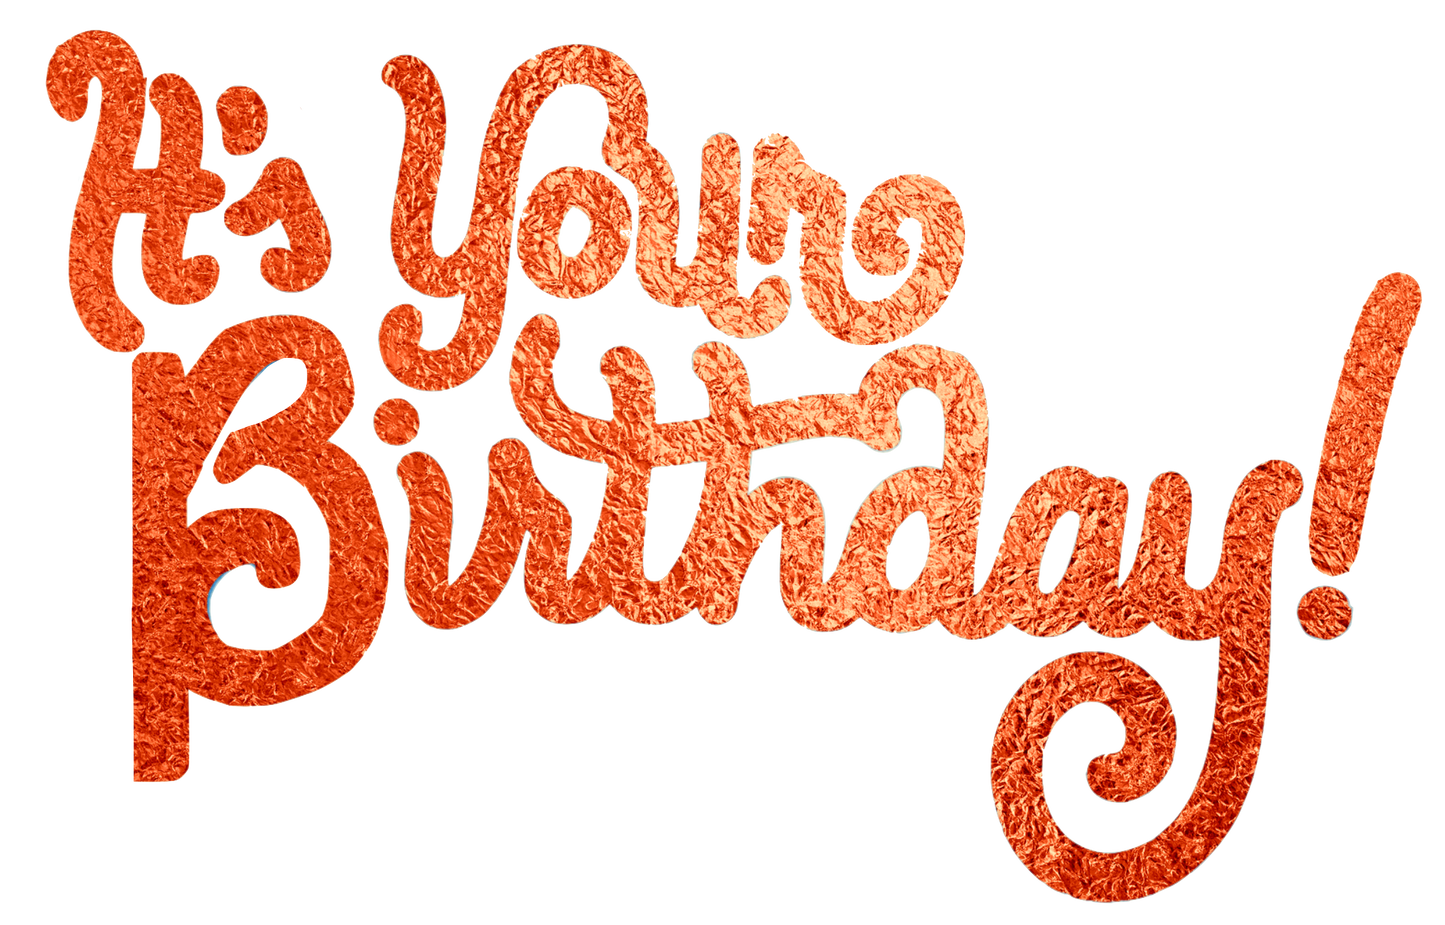 It's Your Birthday words in Shiny Foil Transparent Background - Orange